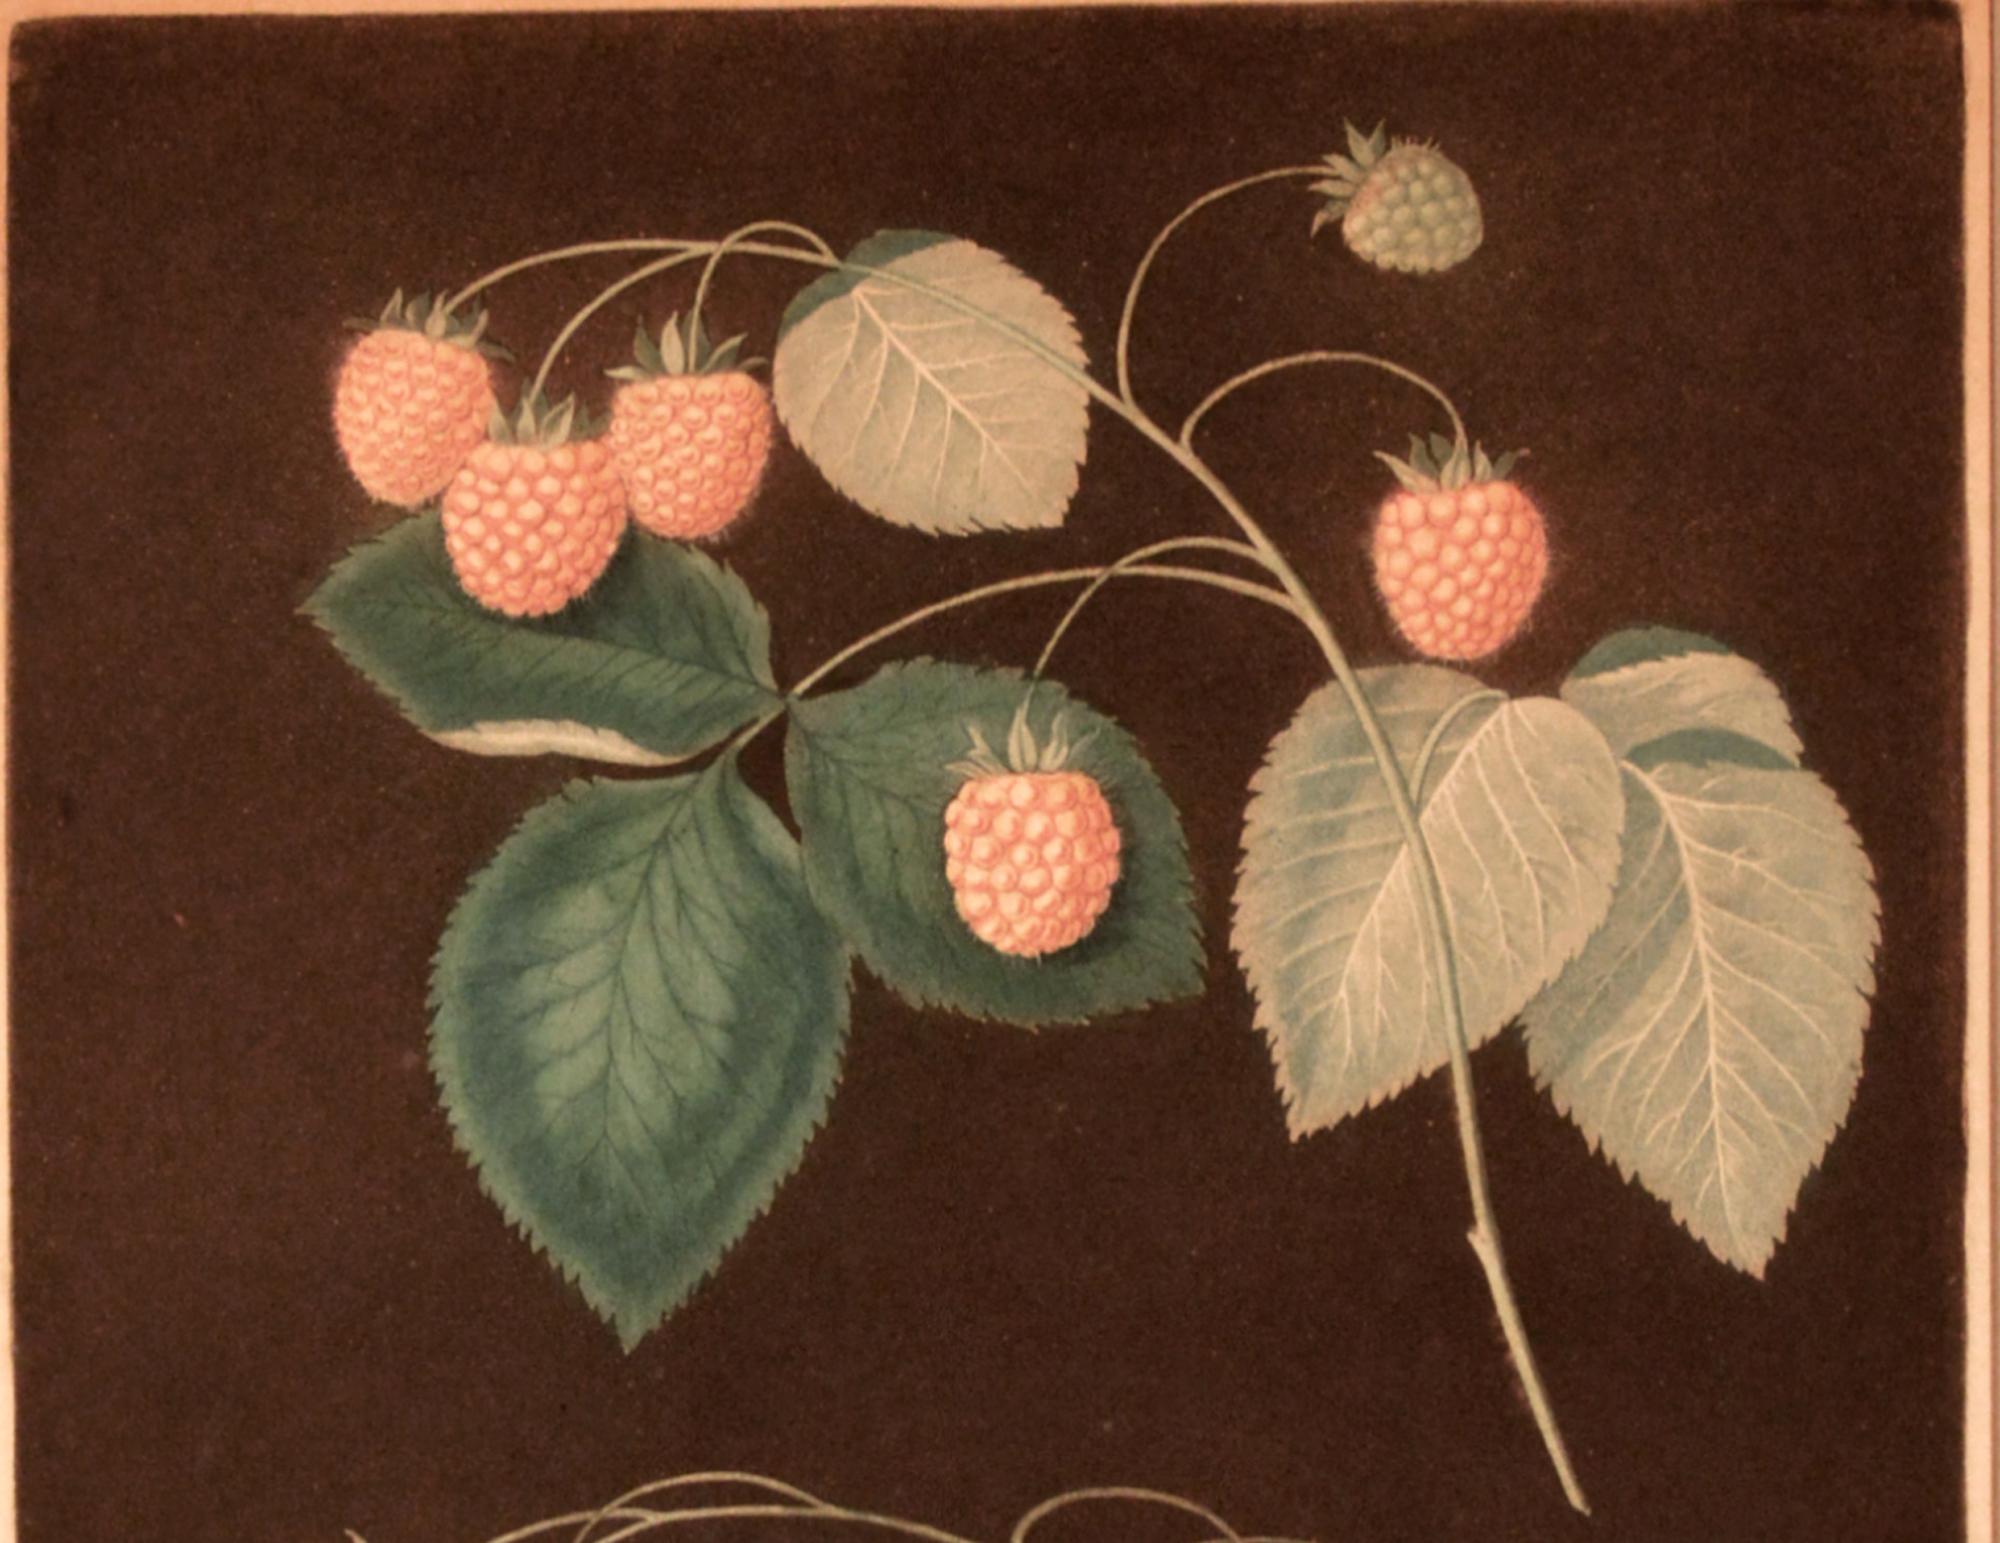 George Brookshaw Print of Two Varieties of Raspberries, One Yellow and One Red In Good Condition For Sale In Downingtown, PA